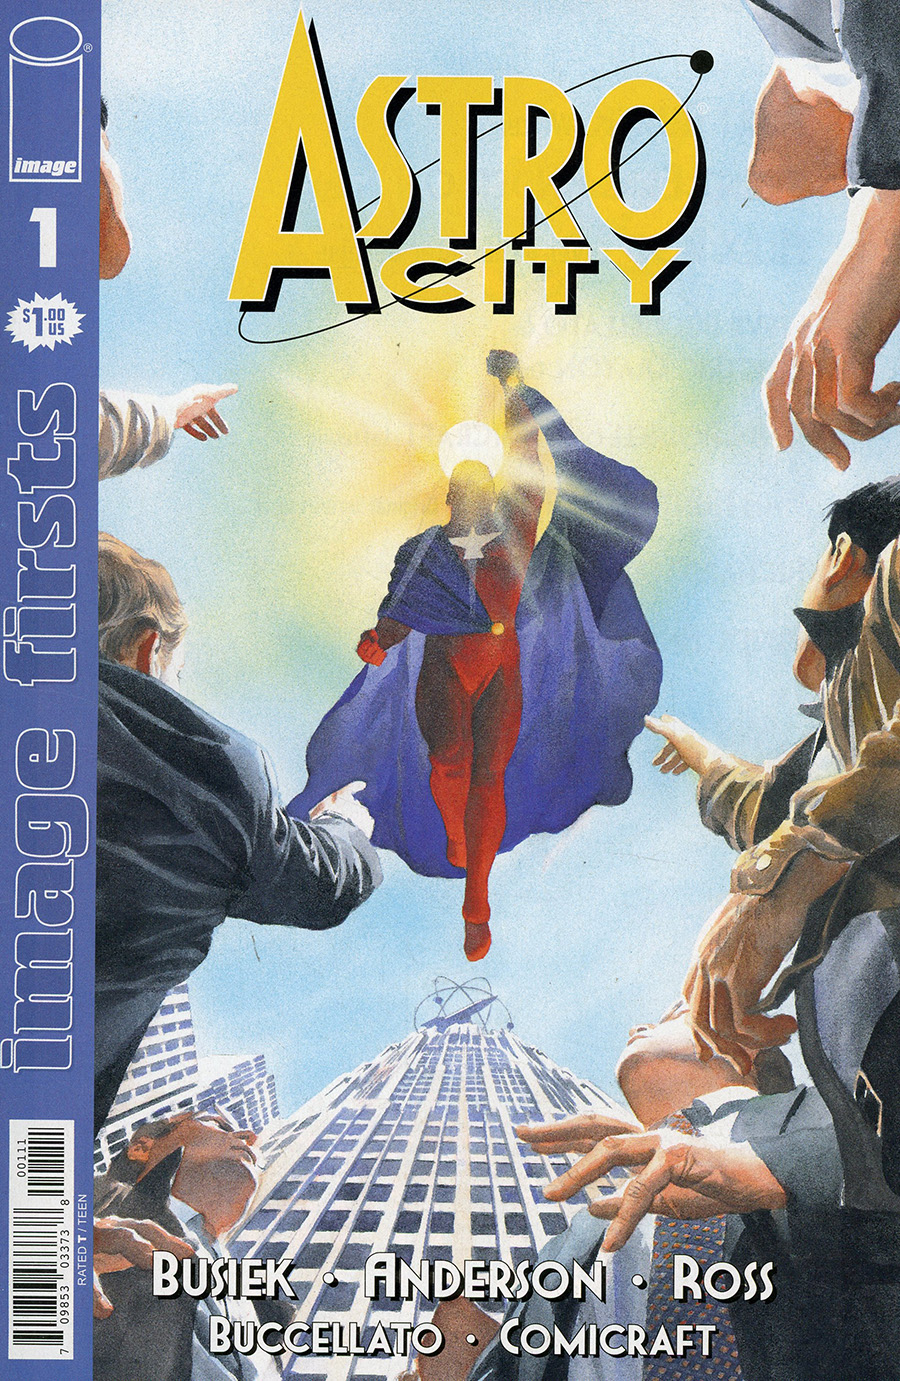 Image Firsts Astro City #1